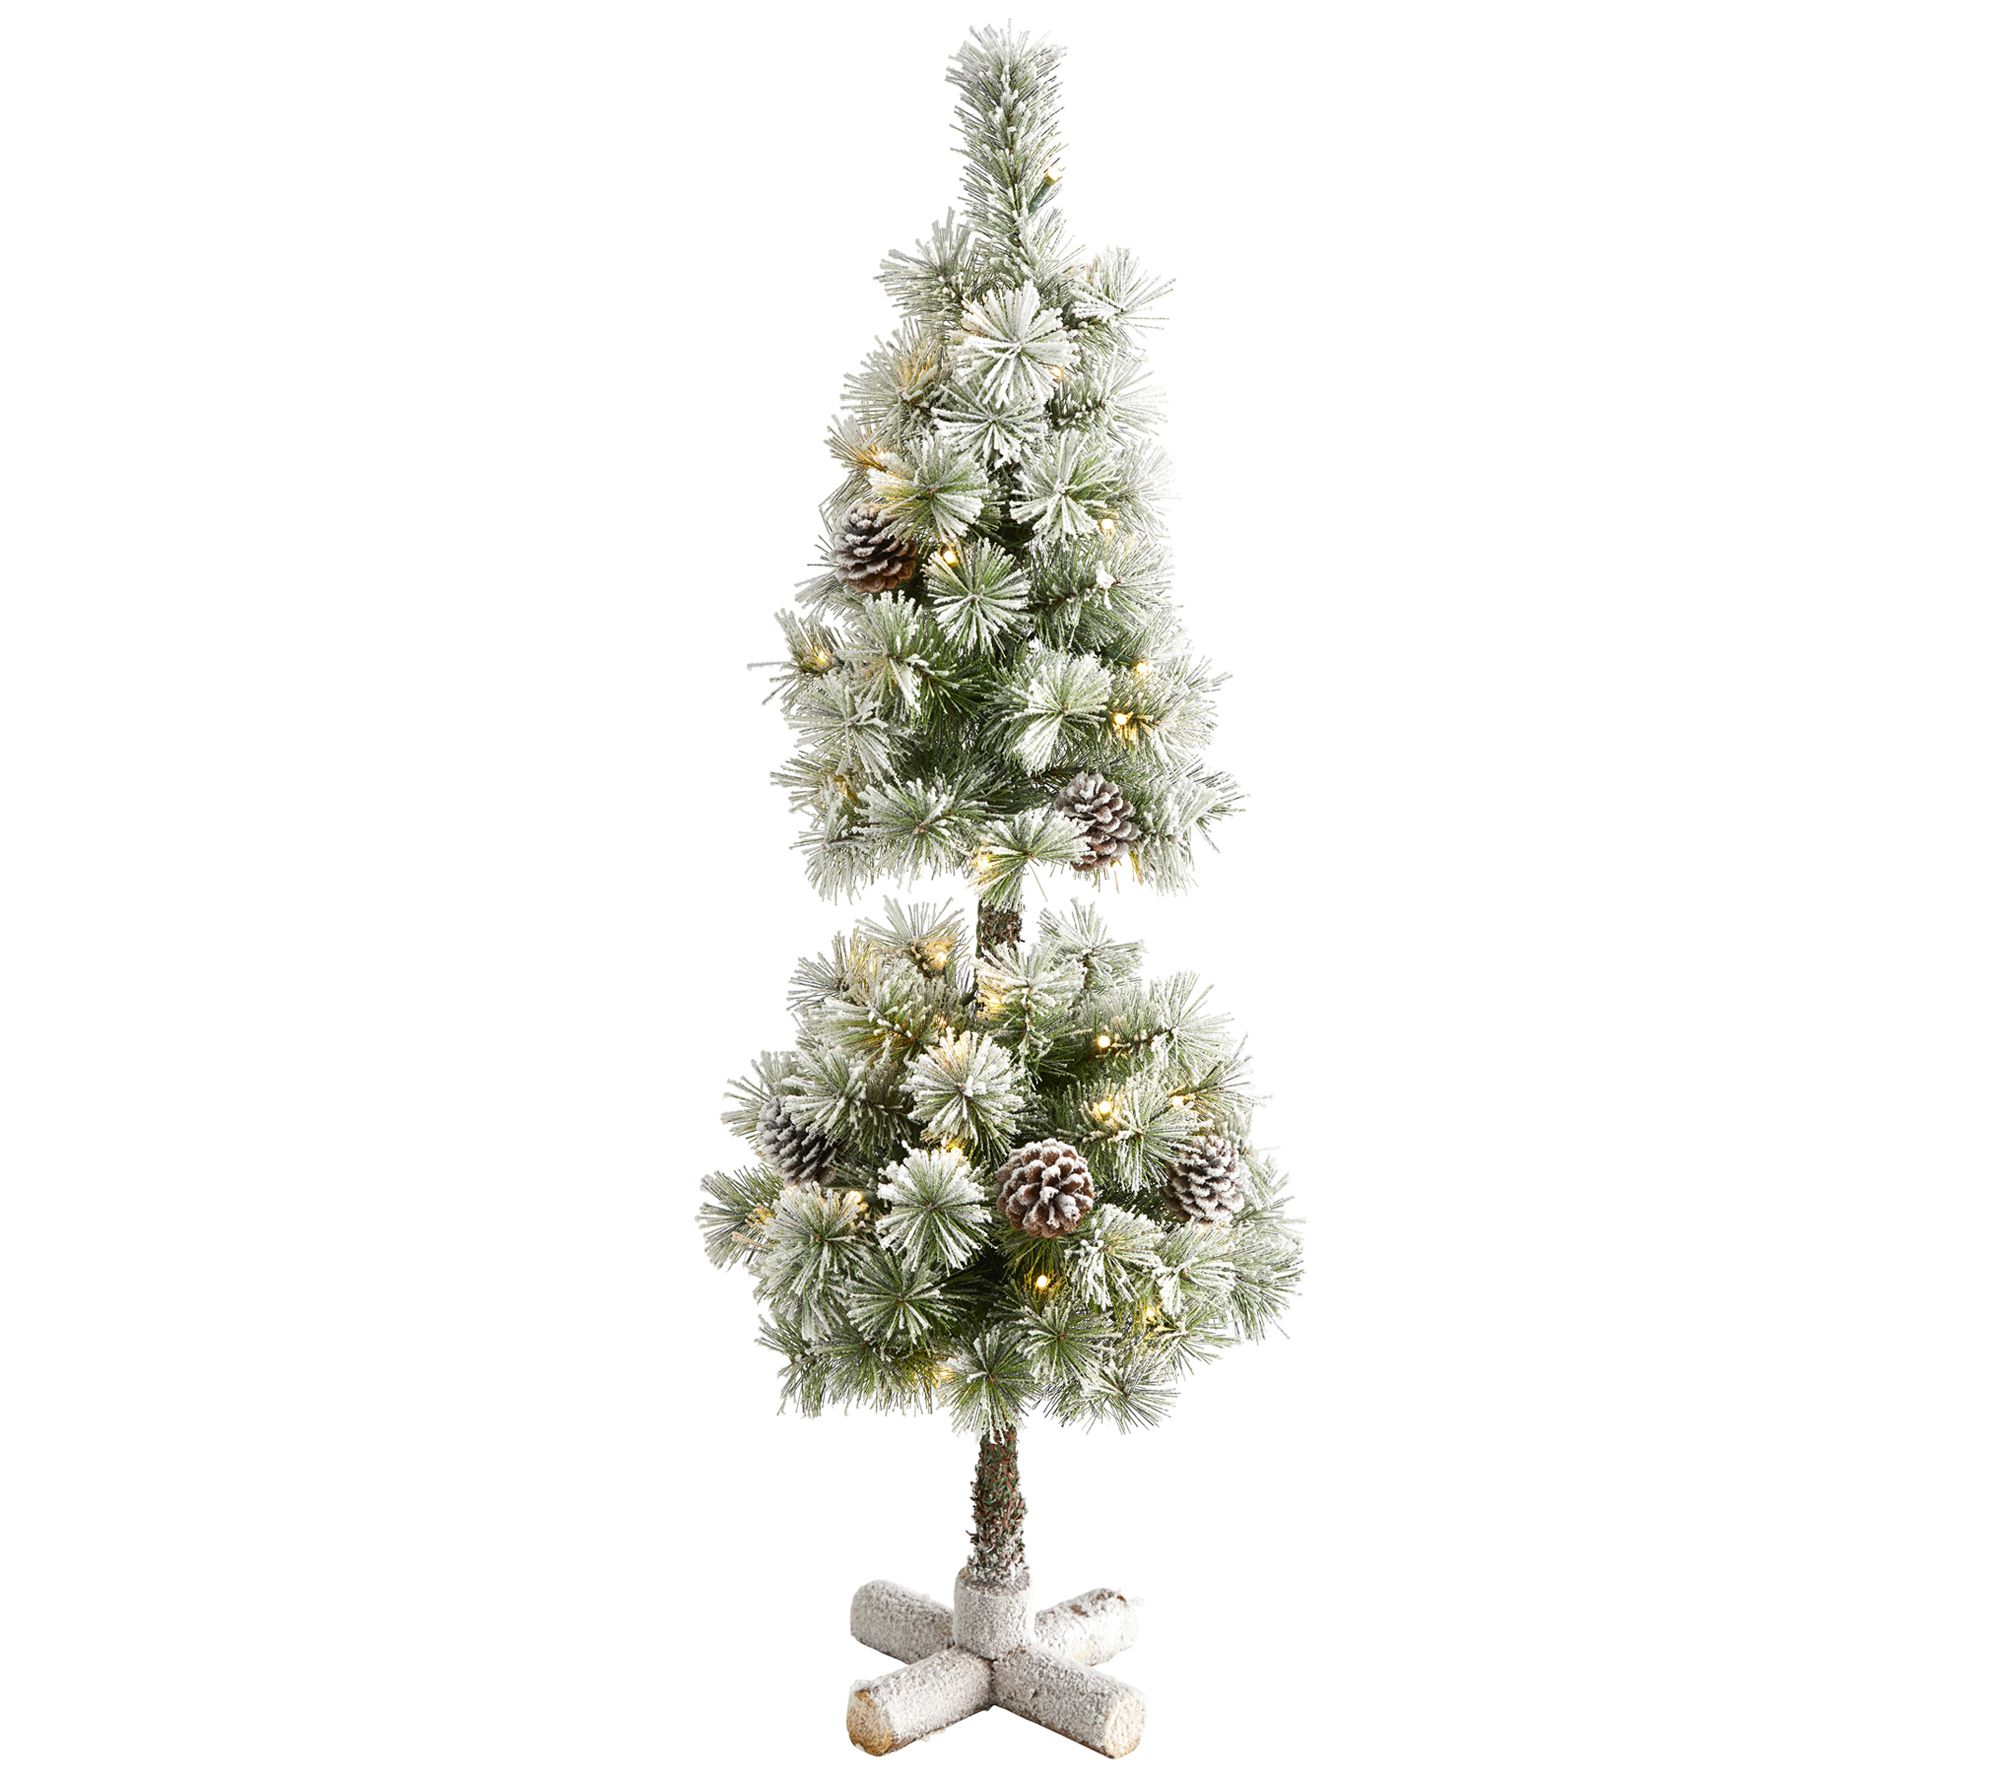 3' Flocked Christmas Tree Topiary w/Lights by Nearly Natural - QVC.com